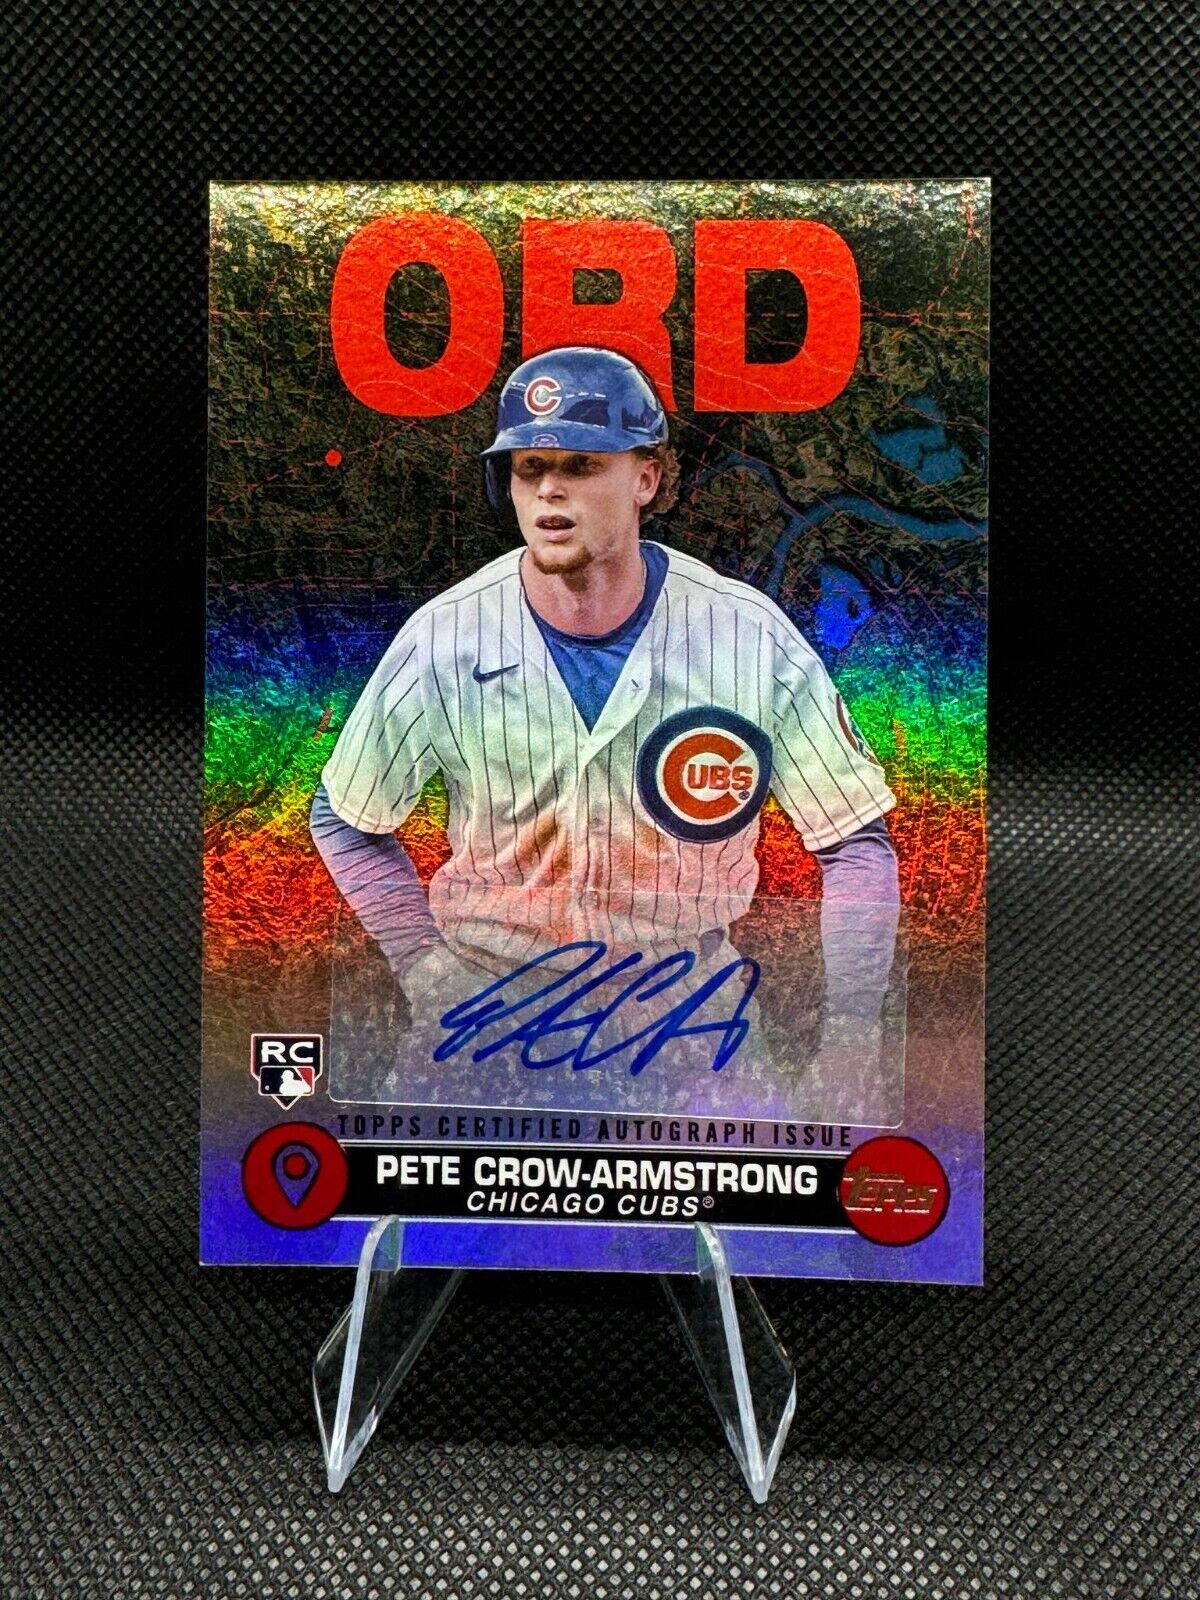 2024 TOPPS SERIES PETE CROW-ARMSTRONG RC 25/25 AUTO CITY TO CITY AUTOGRAPH